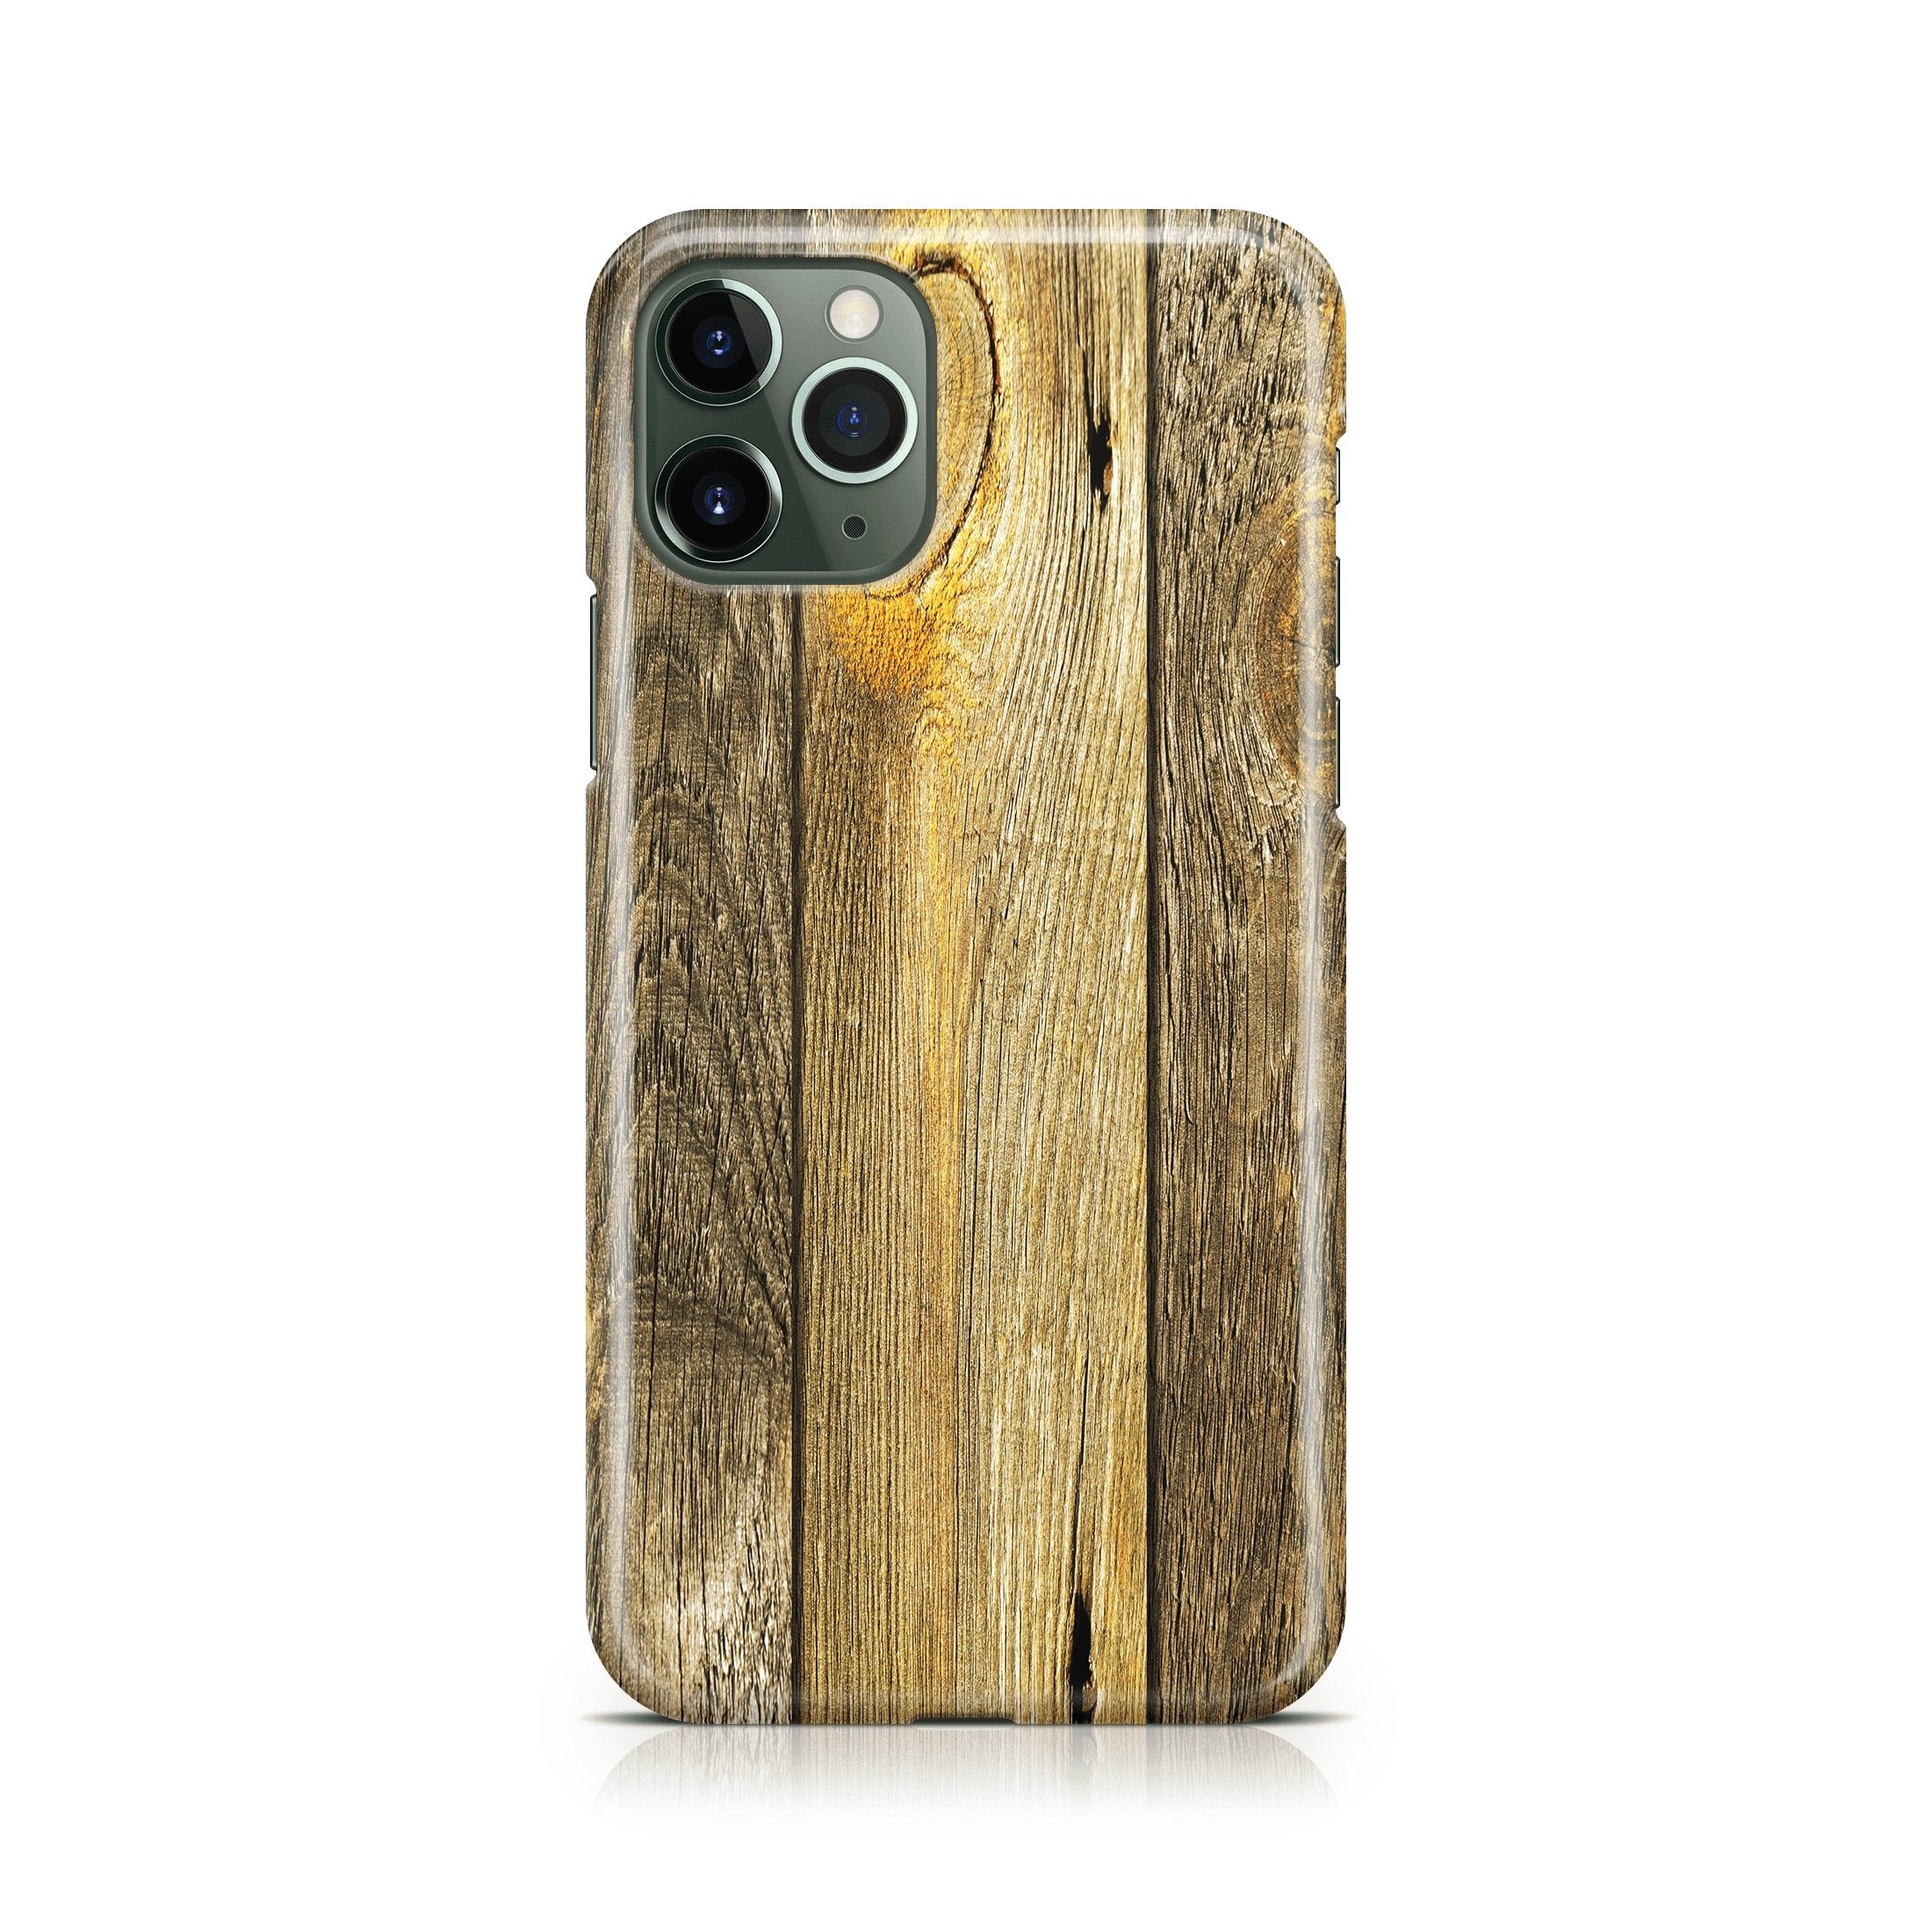 Distressed Wood - iPhone phone case designs by CaseSwagger